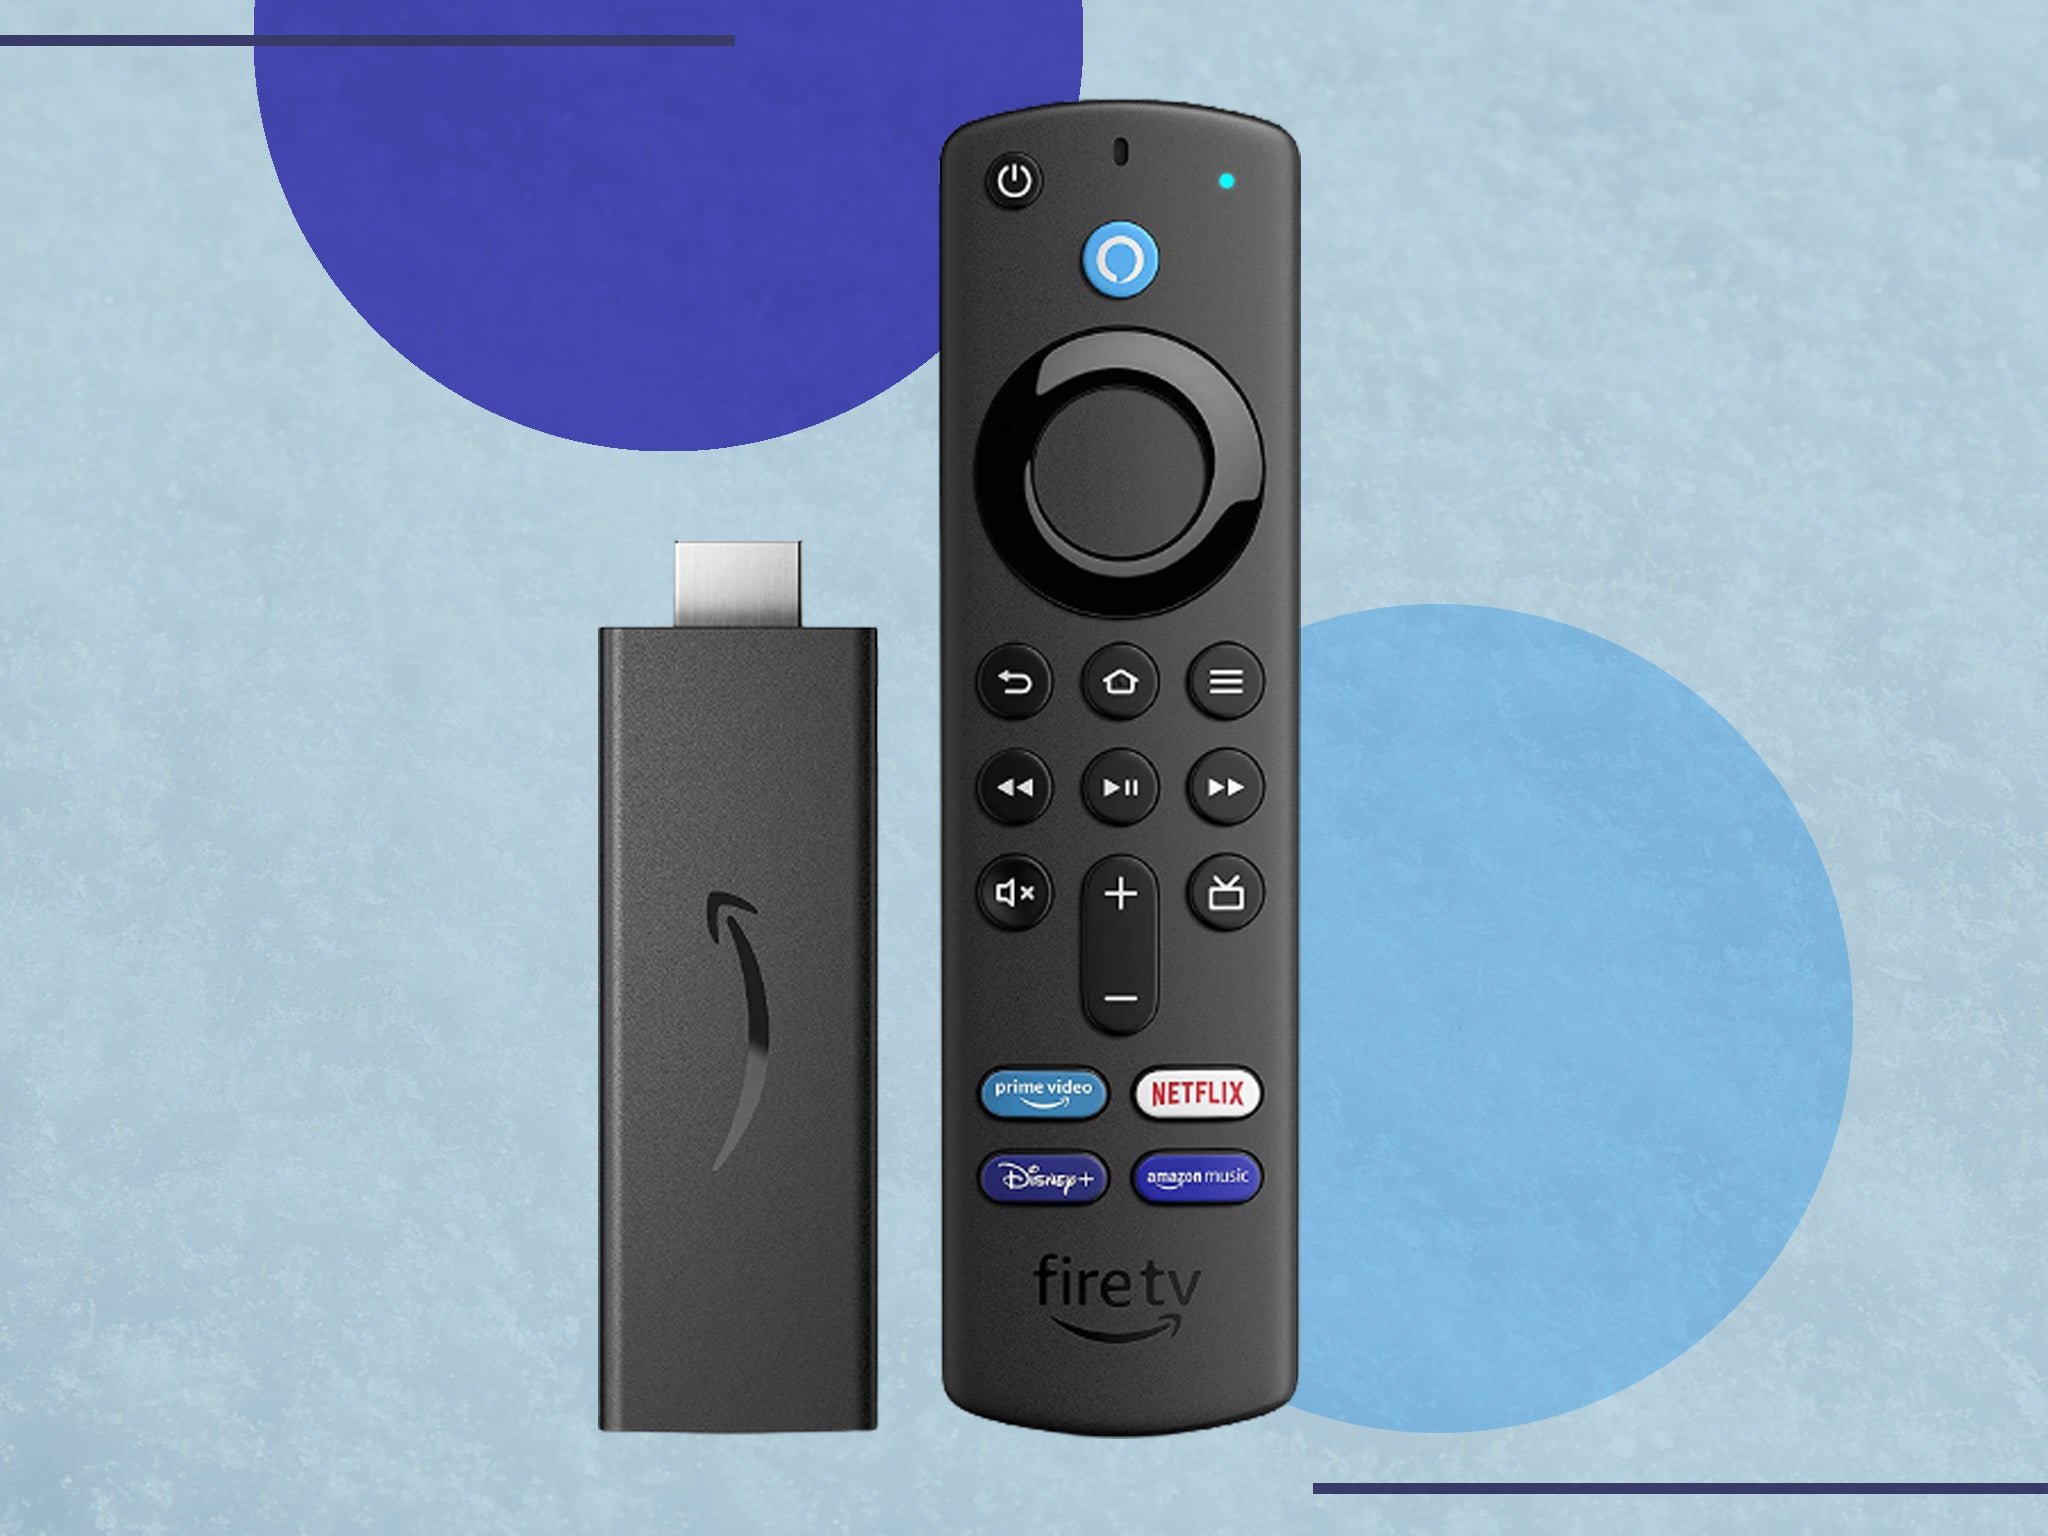 The TV-streaming device is now a bargain